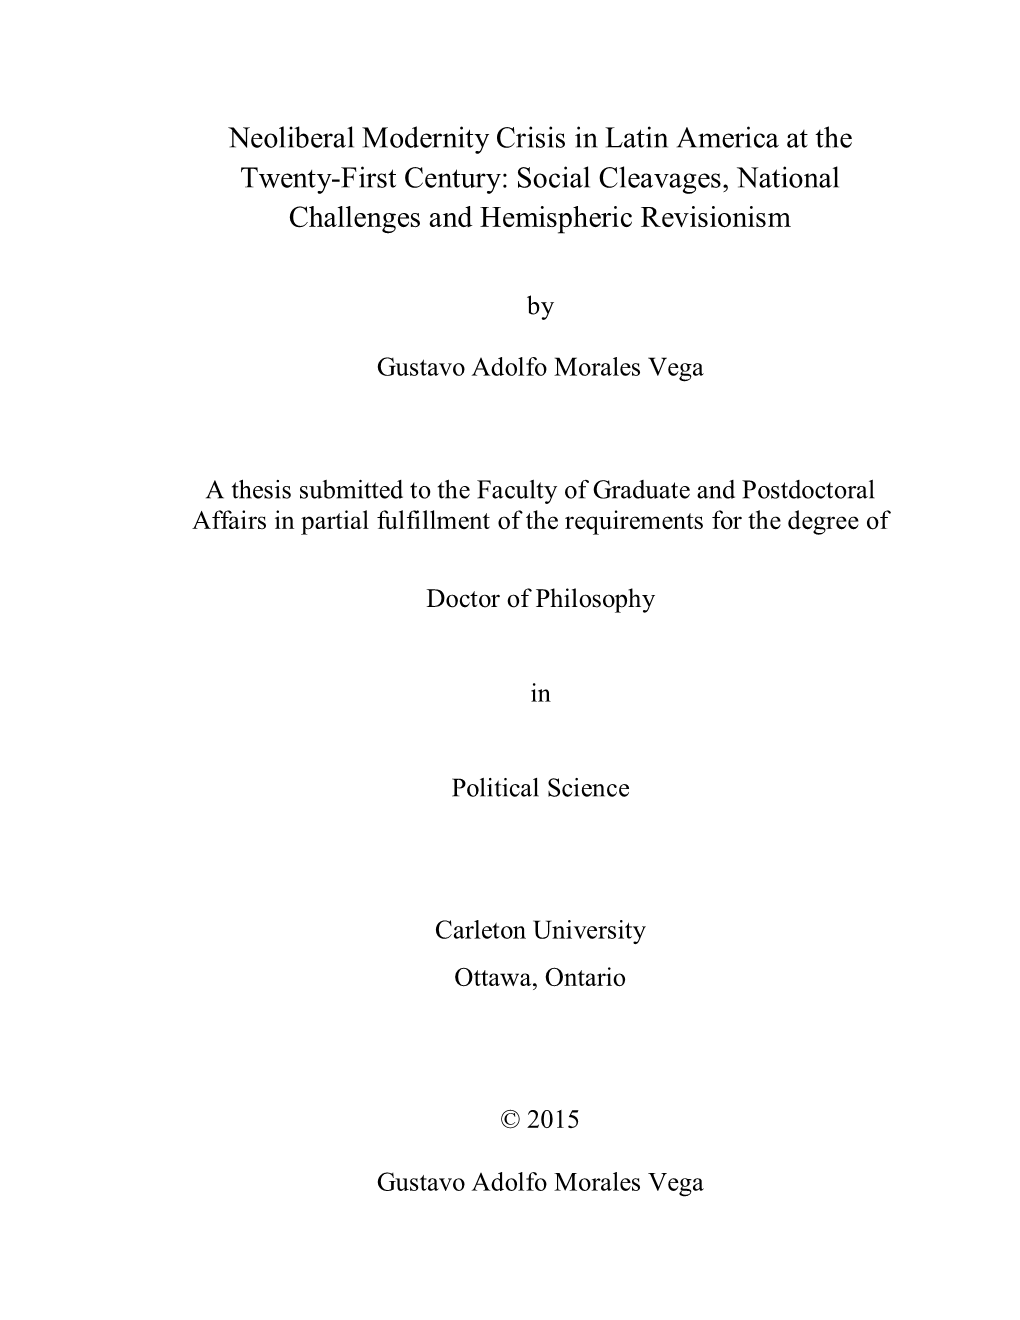 Neoliberal Modernity Crisis in Latin America at the Twenty-First Century: Social Cleavages, National Challenges and Hemispheric Revisionism